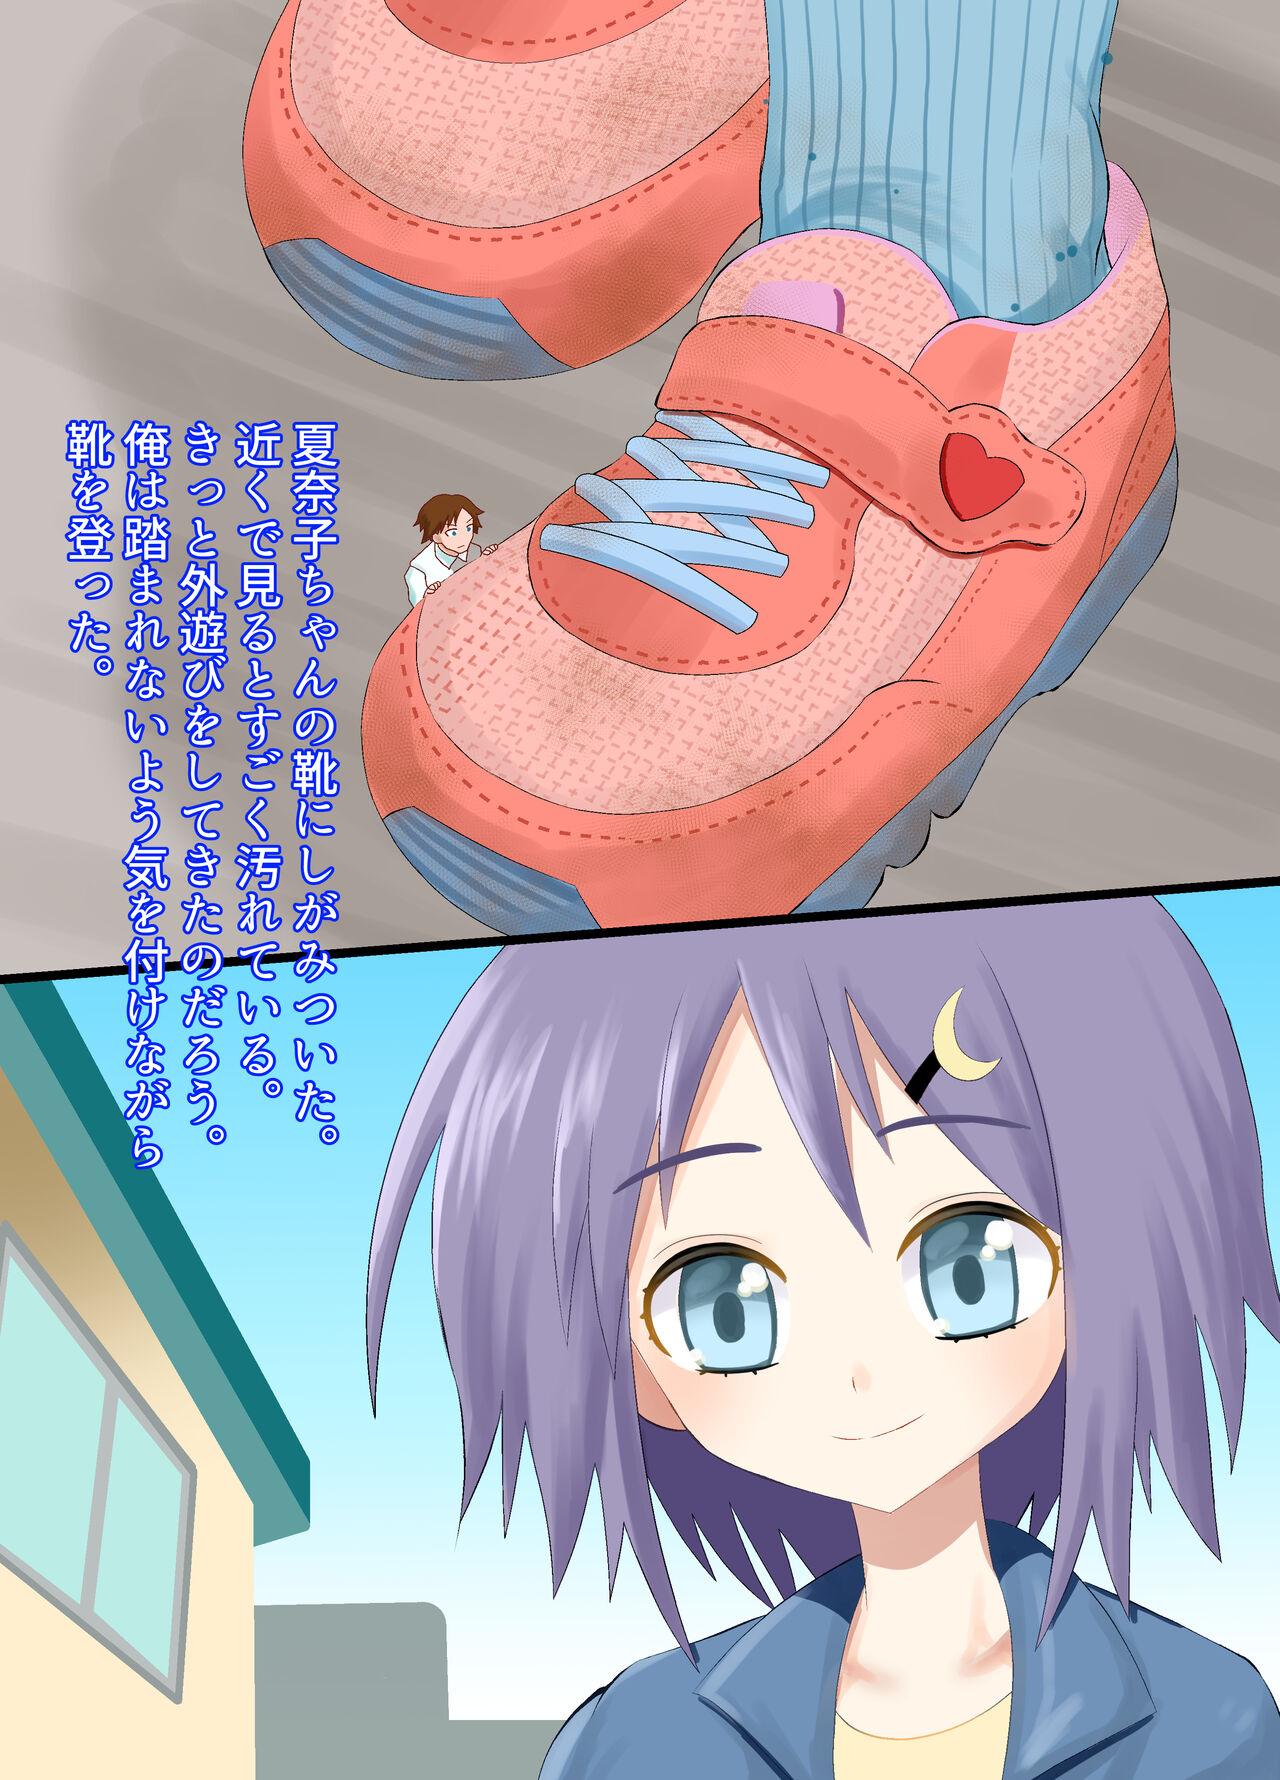 Cumming A CG collection of getting smaller and being stepped on by a girl - Original Dyke - Page 5